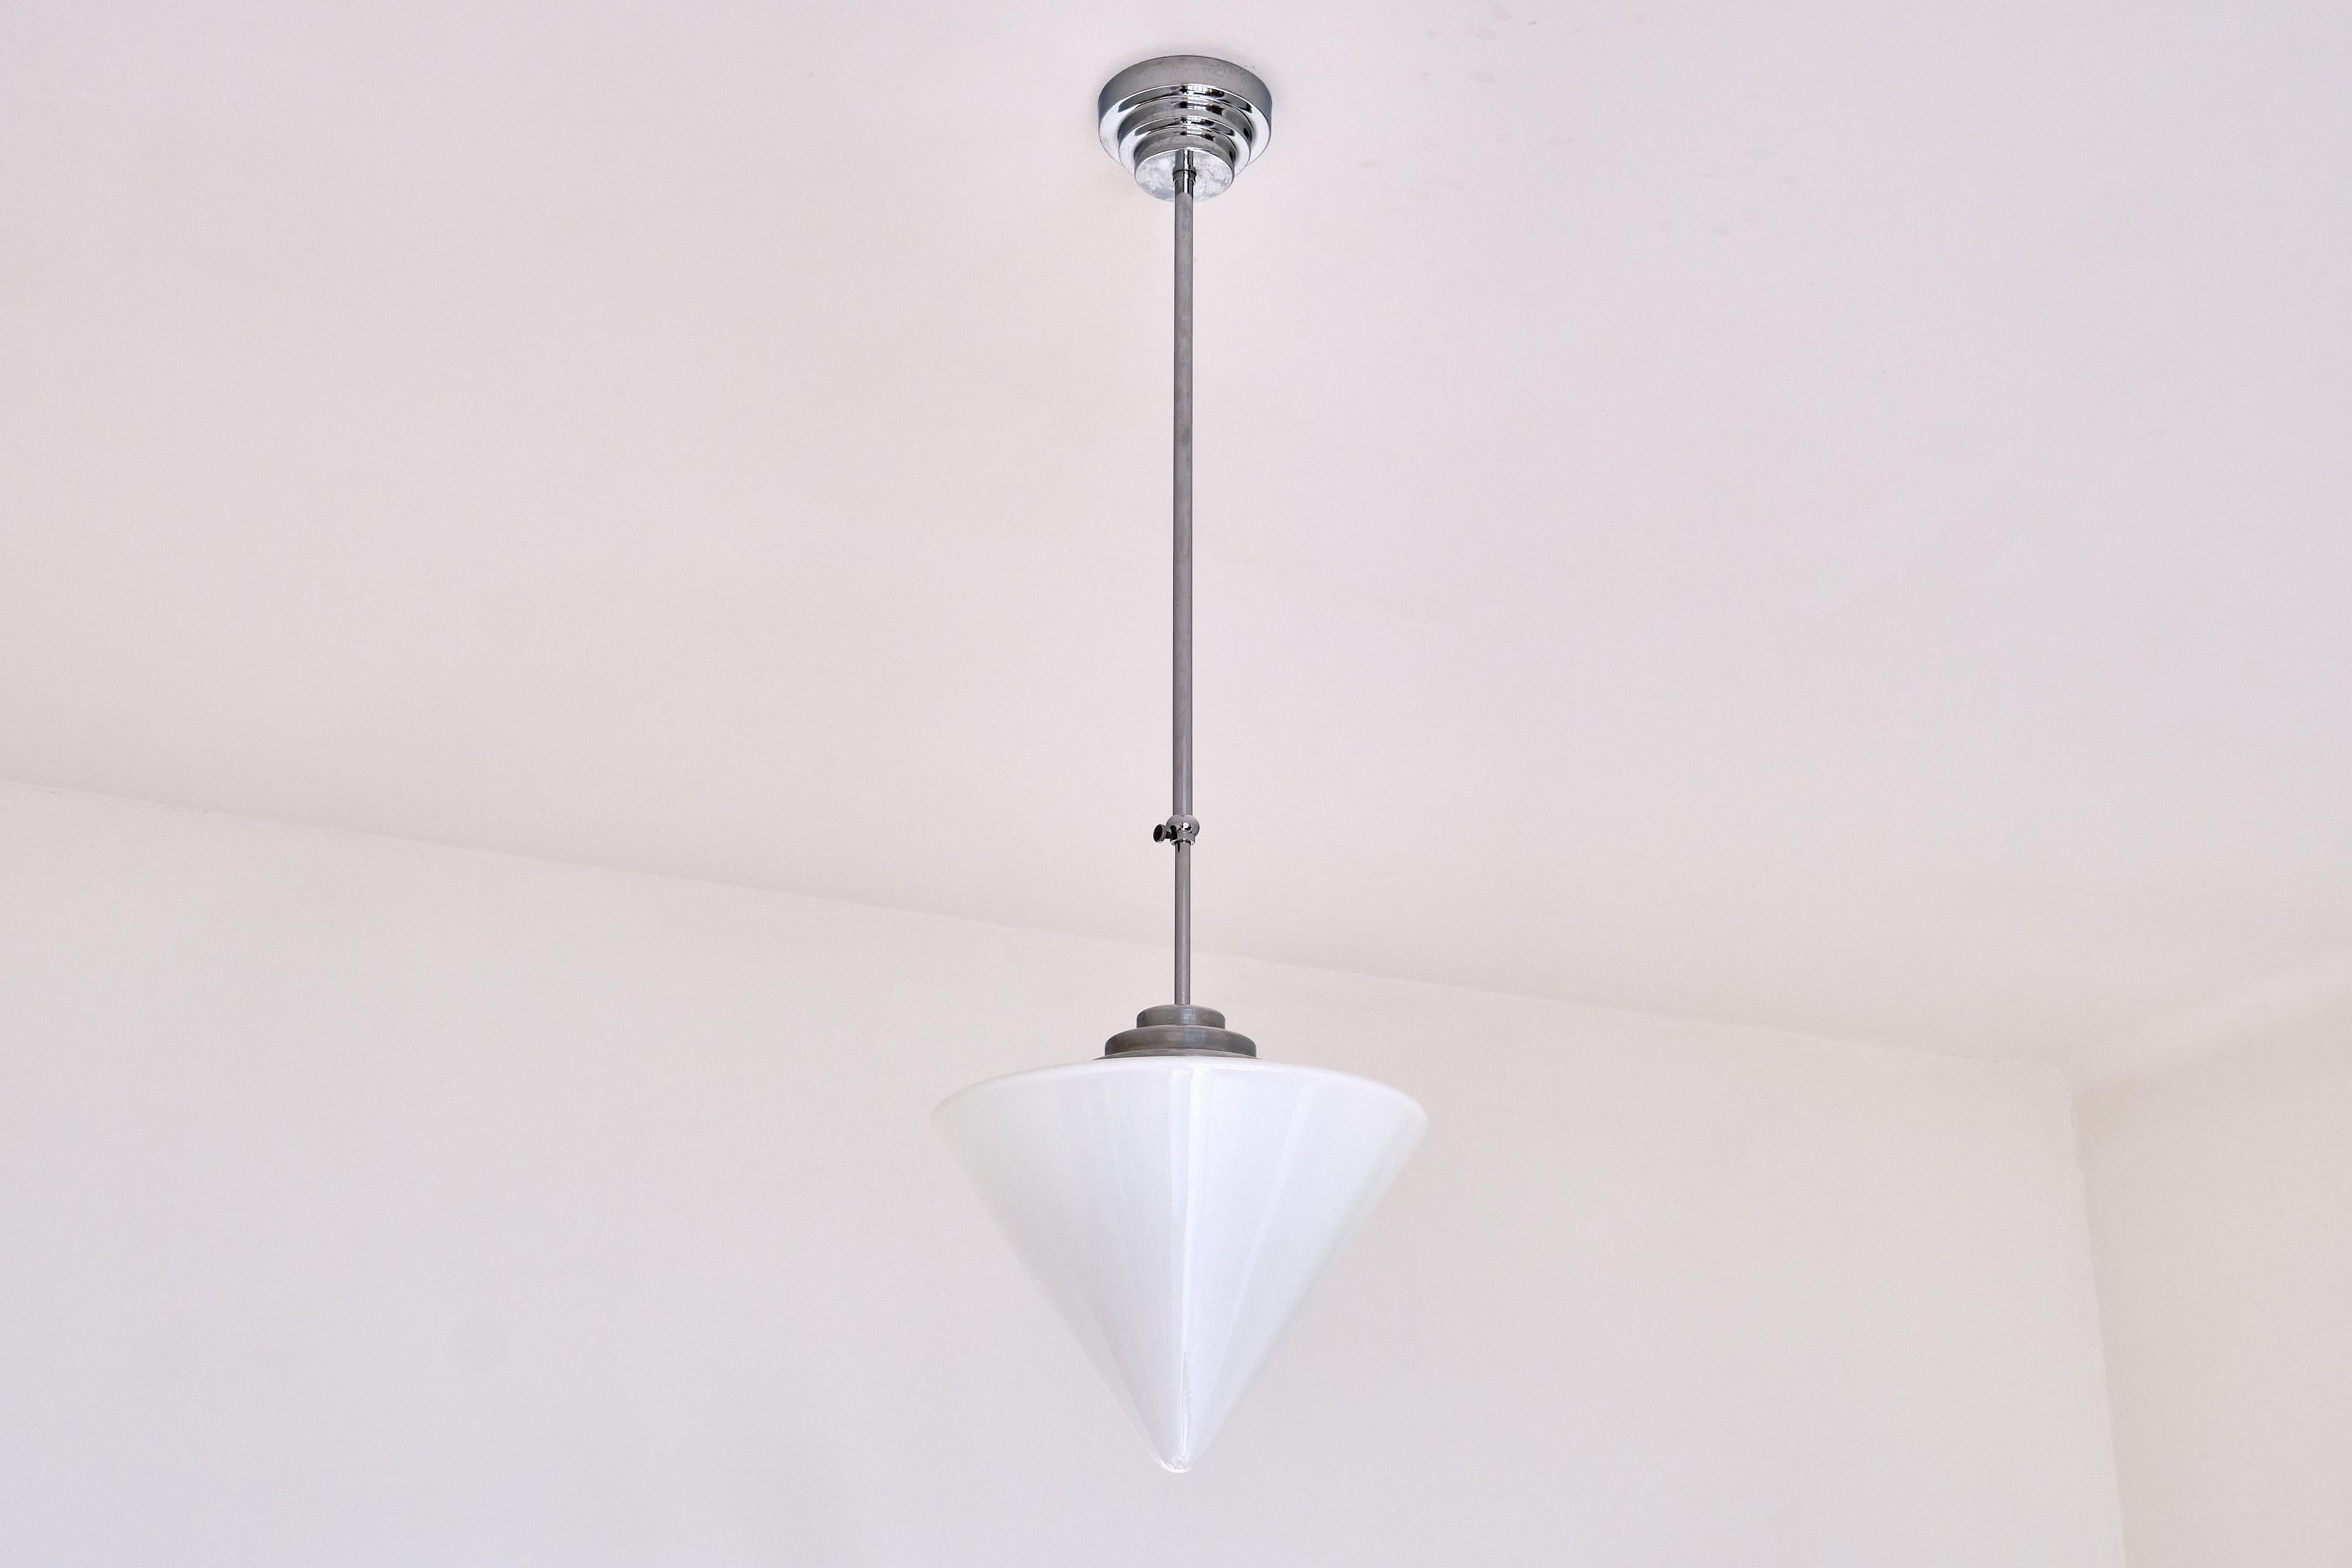 This rare pendant light was produced by Gispen in The Netherlands in the 1950s. The striking cone shaped shade is made of a slightly glossy, white opaline glass. The shade is attached to the pendant fixture made in a glossy nickel, with a beautiful